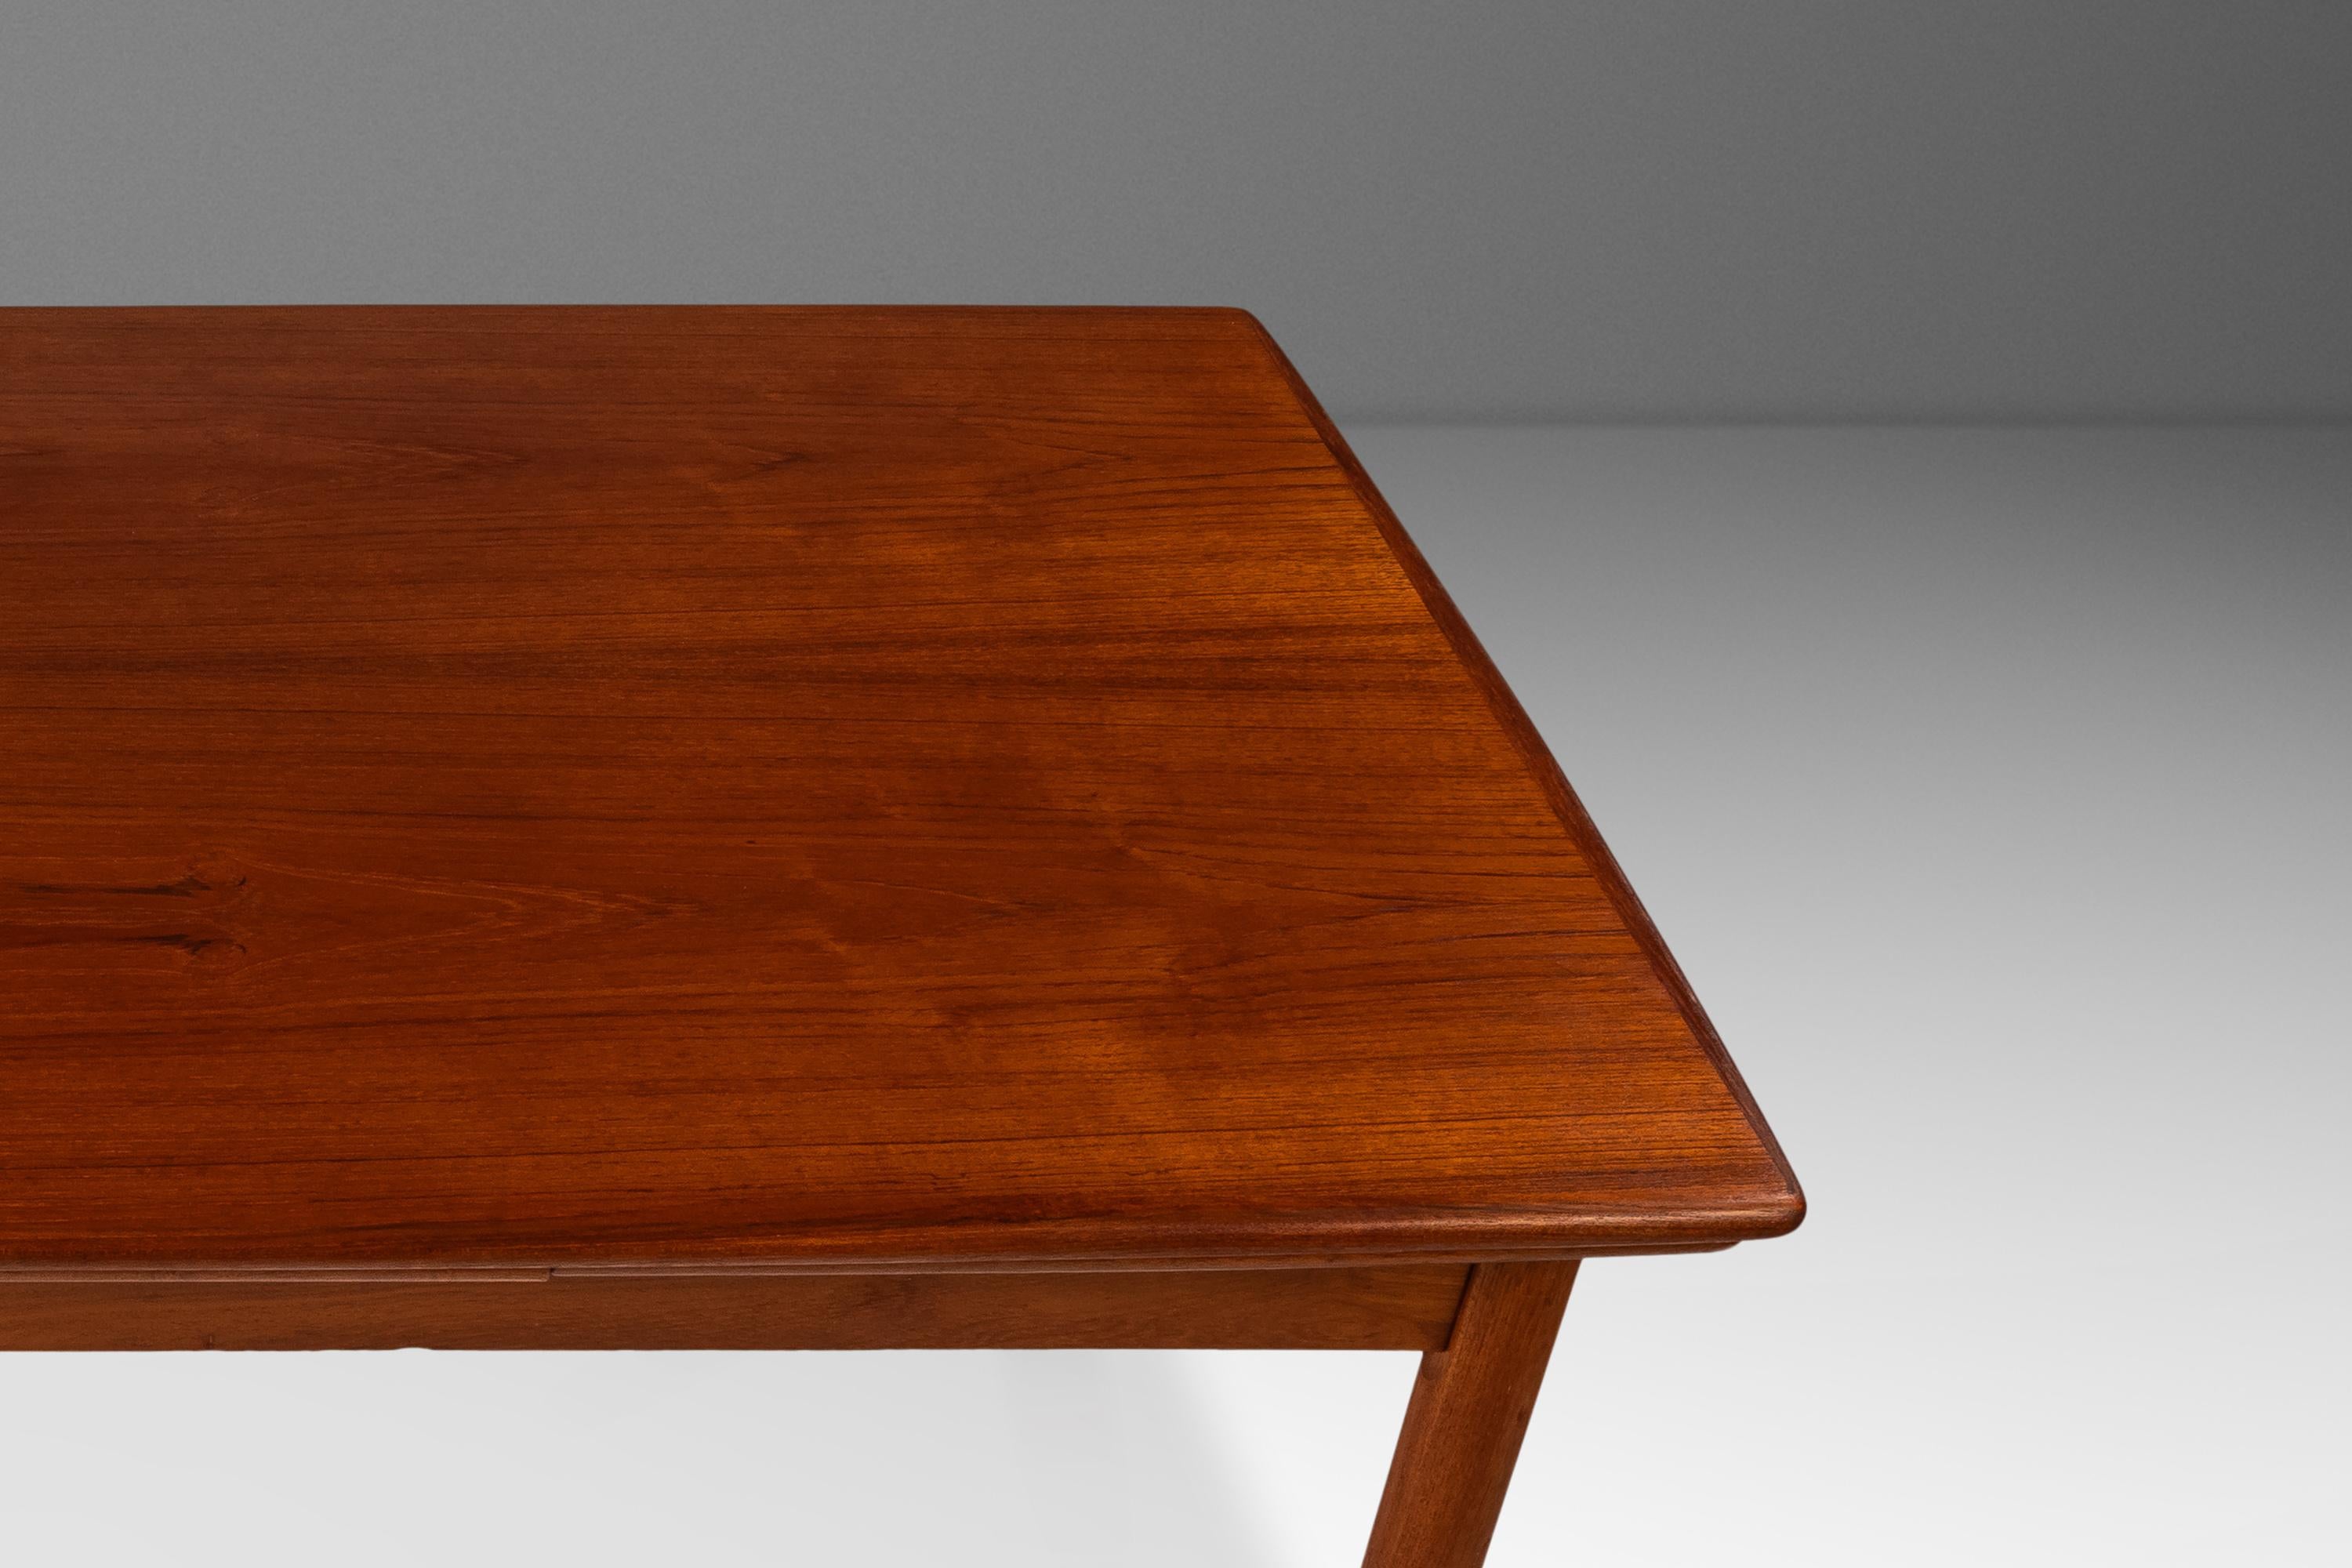 Danish Modern Expansion Dining Table in Teak w/ Stow-In-Table Leaves, c. 1960s For Sale 10